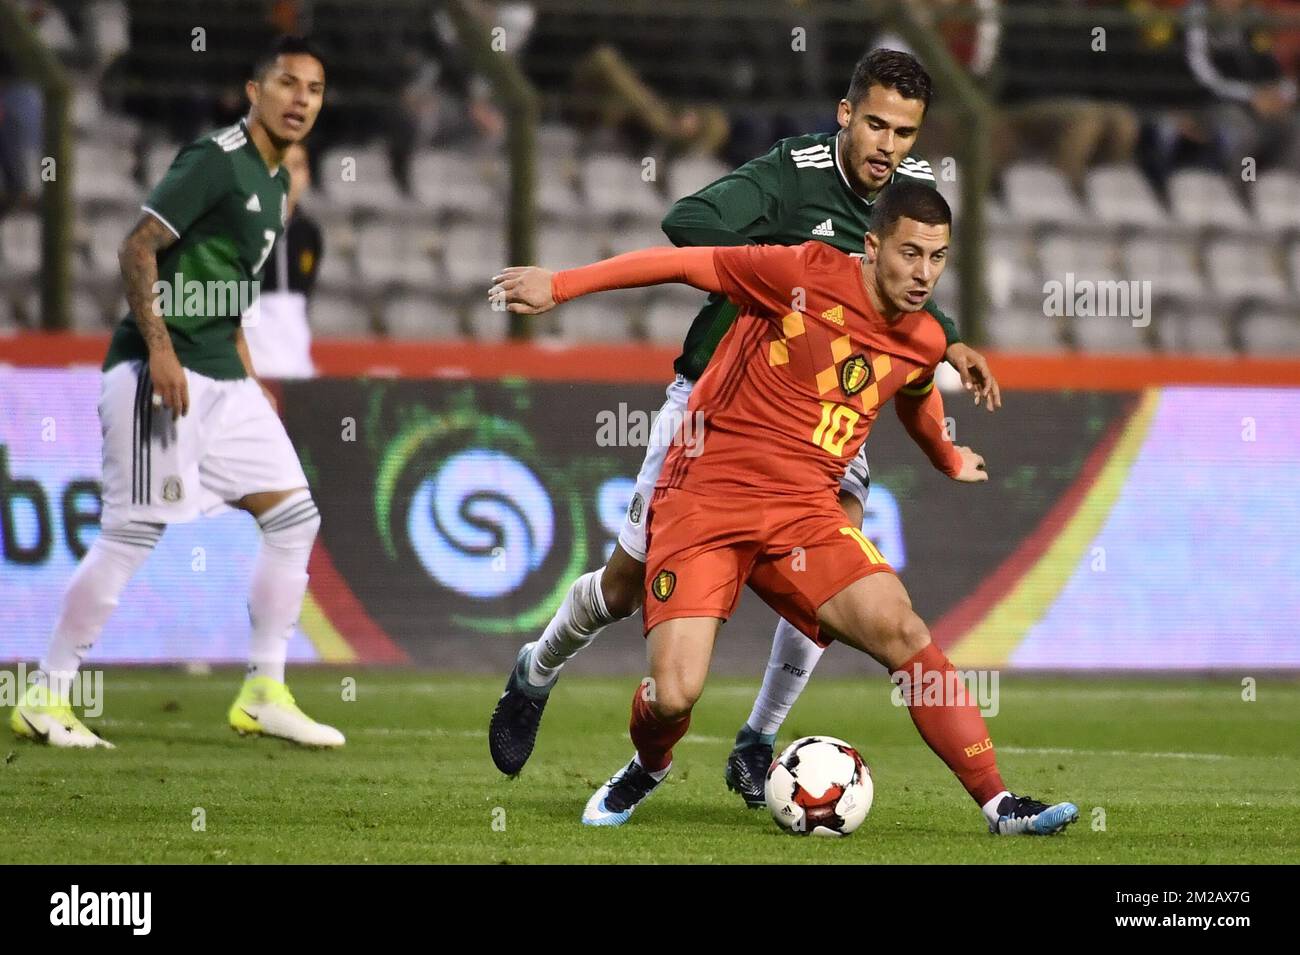 Belgium's Eden Hazard and Mexico's Diego Reyes fight for the ball during a friendly soccer game between Belgian national team Red Devils and Mexico, Friday 10 November 2017, in Brugge. BELGA PHOTO DIRK WAEM  Stock Photo